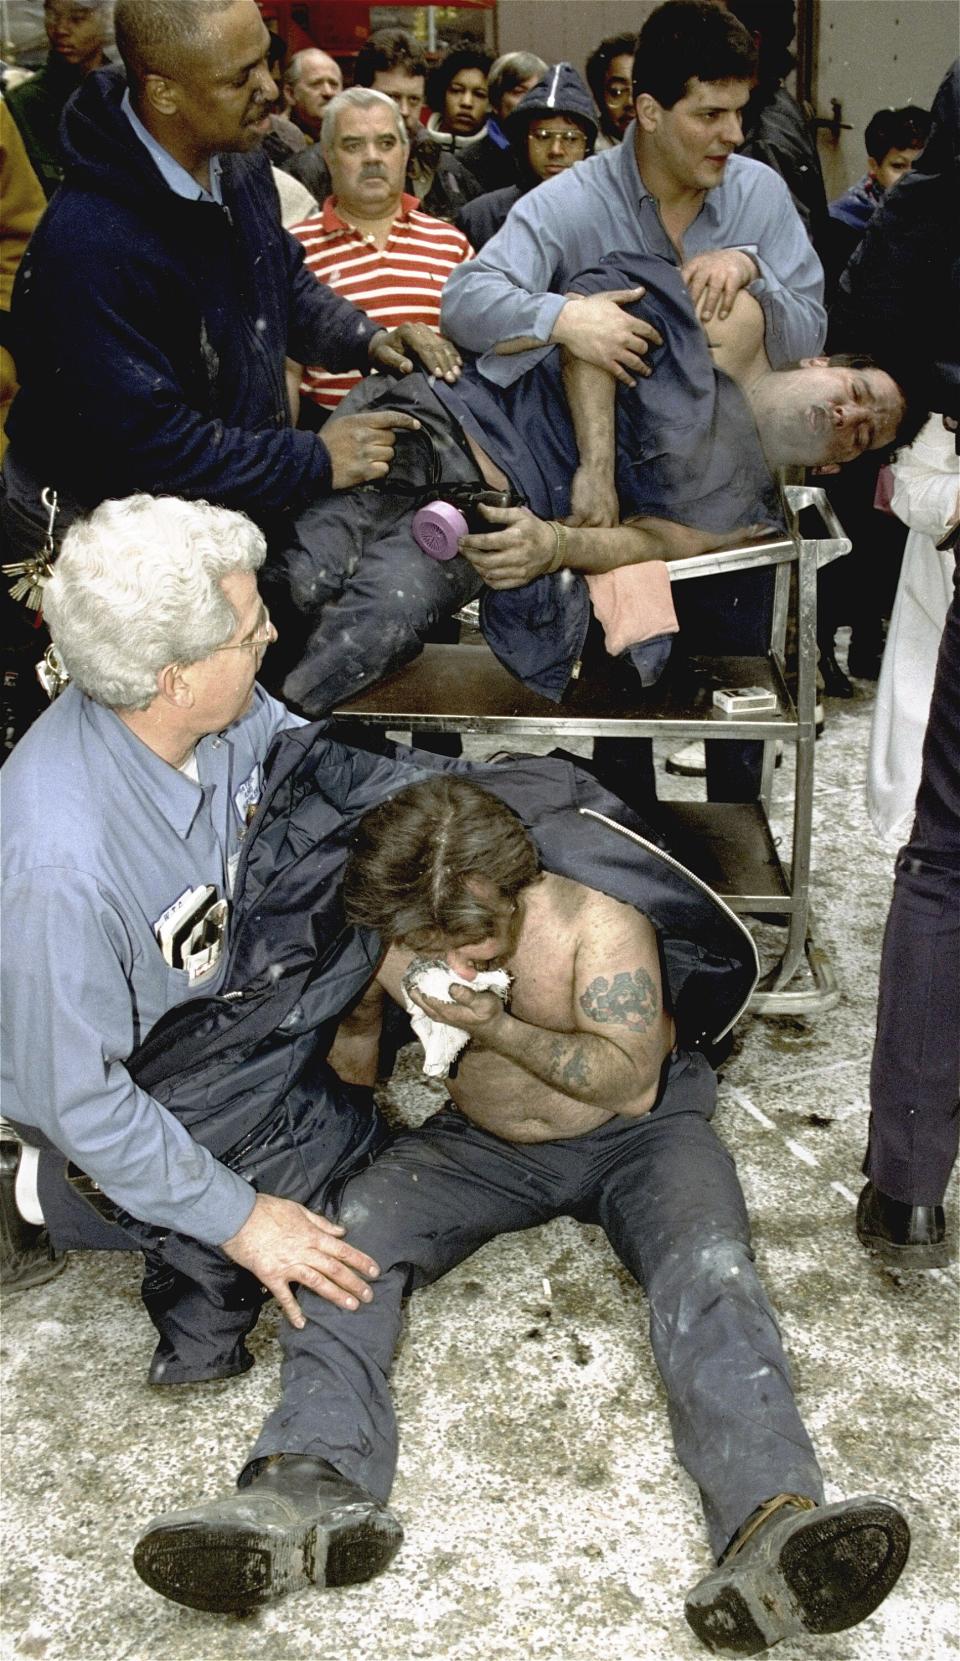 FILE - Victims of a fire at the World Trade Center in New York are treated at the scene, Feb. 26, 1993. New York City is marking the anniversary of the 1993 bombing that blew apart a van parked in an underground garage, killing six people and injured more than 1,000. The Port Authority of New York and New Jersey is holding a memorial Mass on Monday, Feb. 26, 2024 at St. Peter’s Church in Manhattan. (AP Photo/Marty Lederhandler, file)